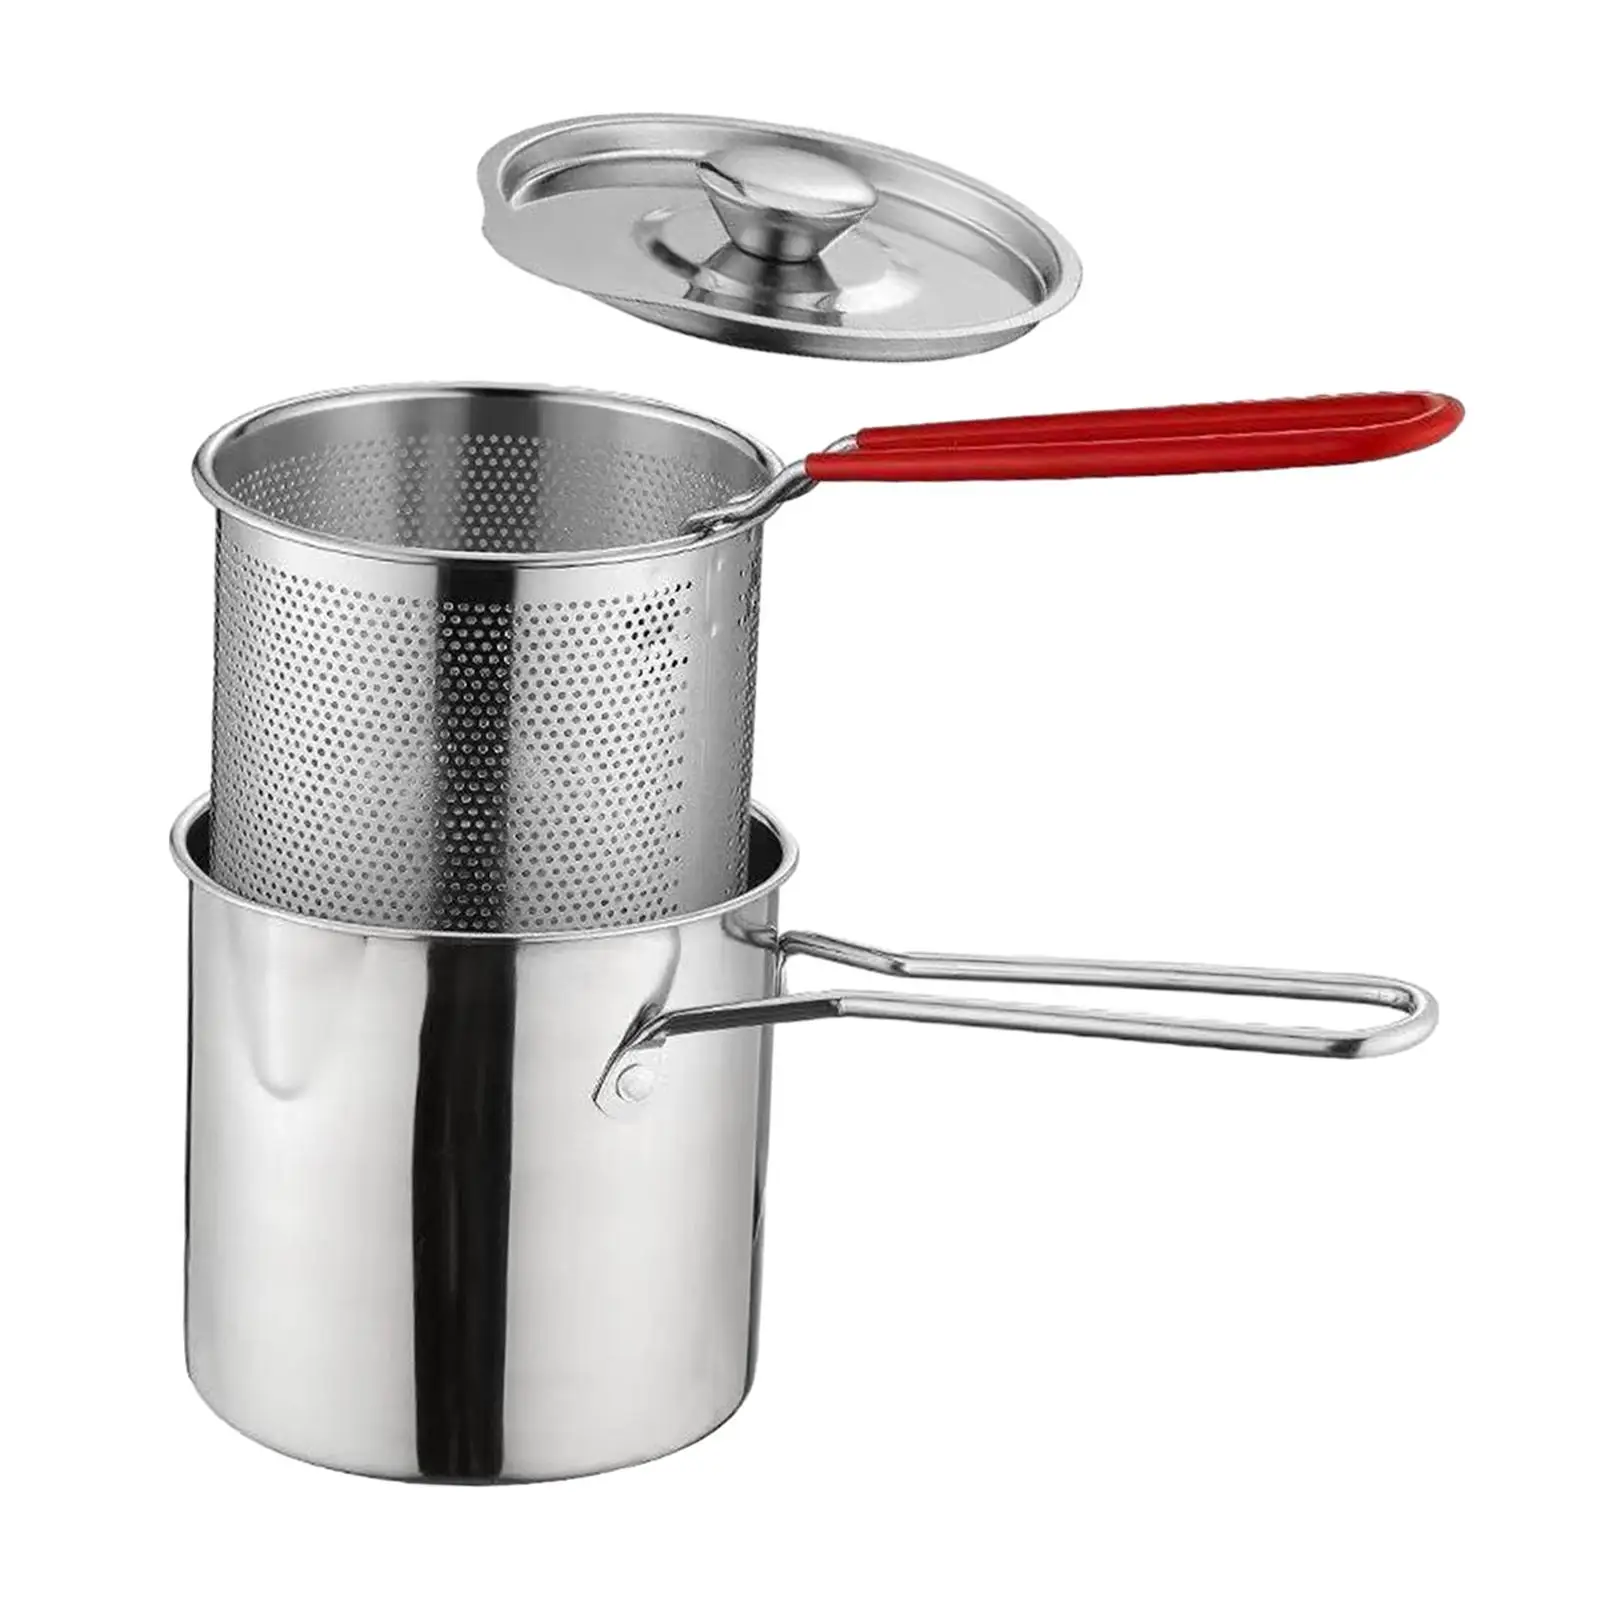 Deep Frying Pot Universal Milk Pot Cookware with Strainer Basket Frying Basket for Party Frying Cooking Kitchen Dining Room